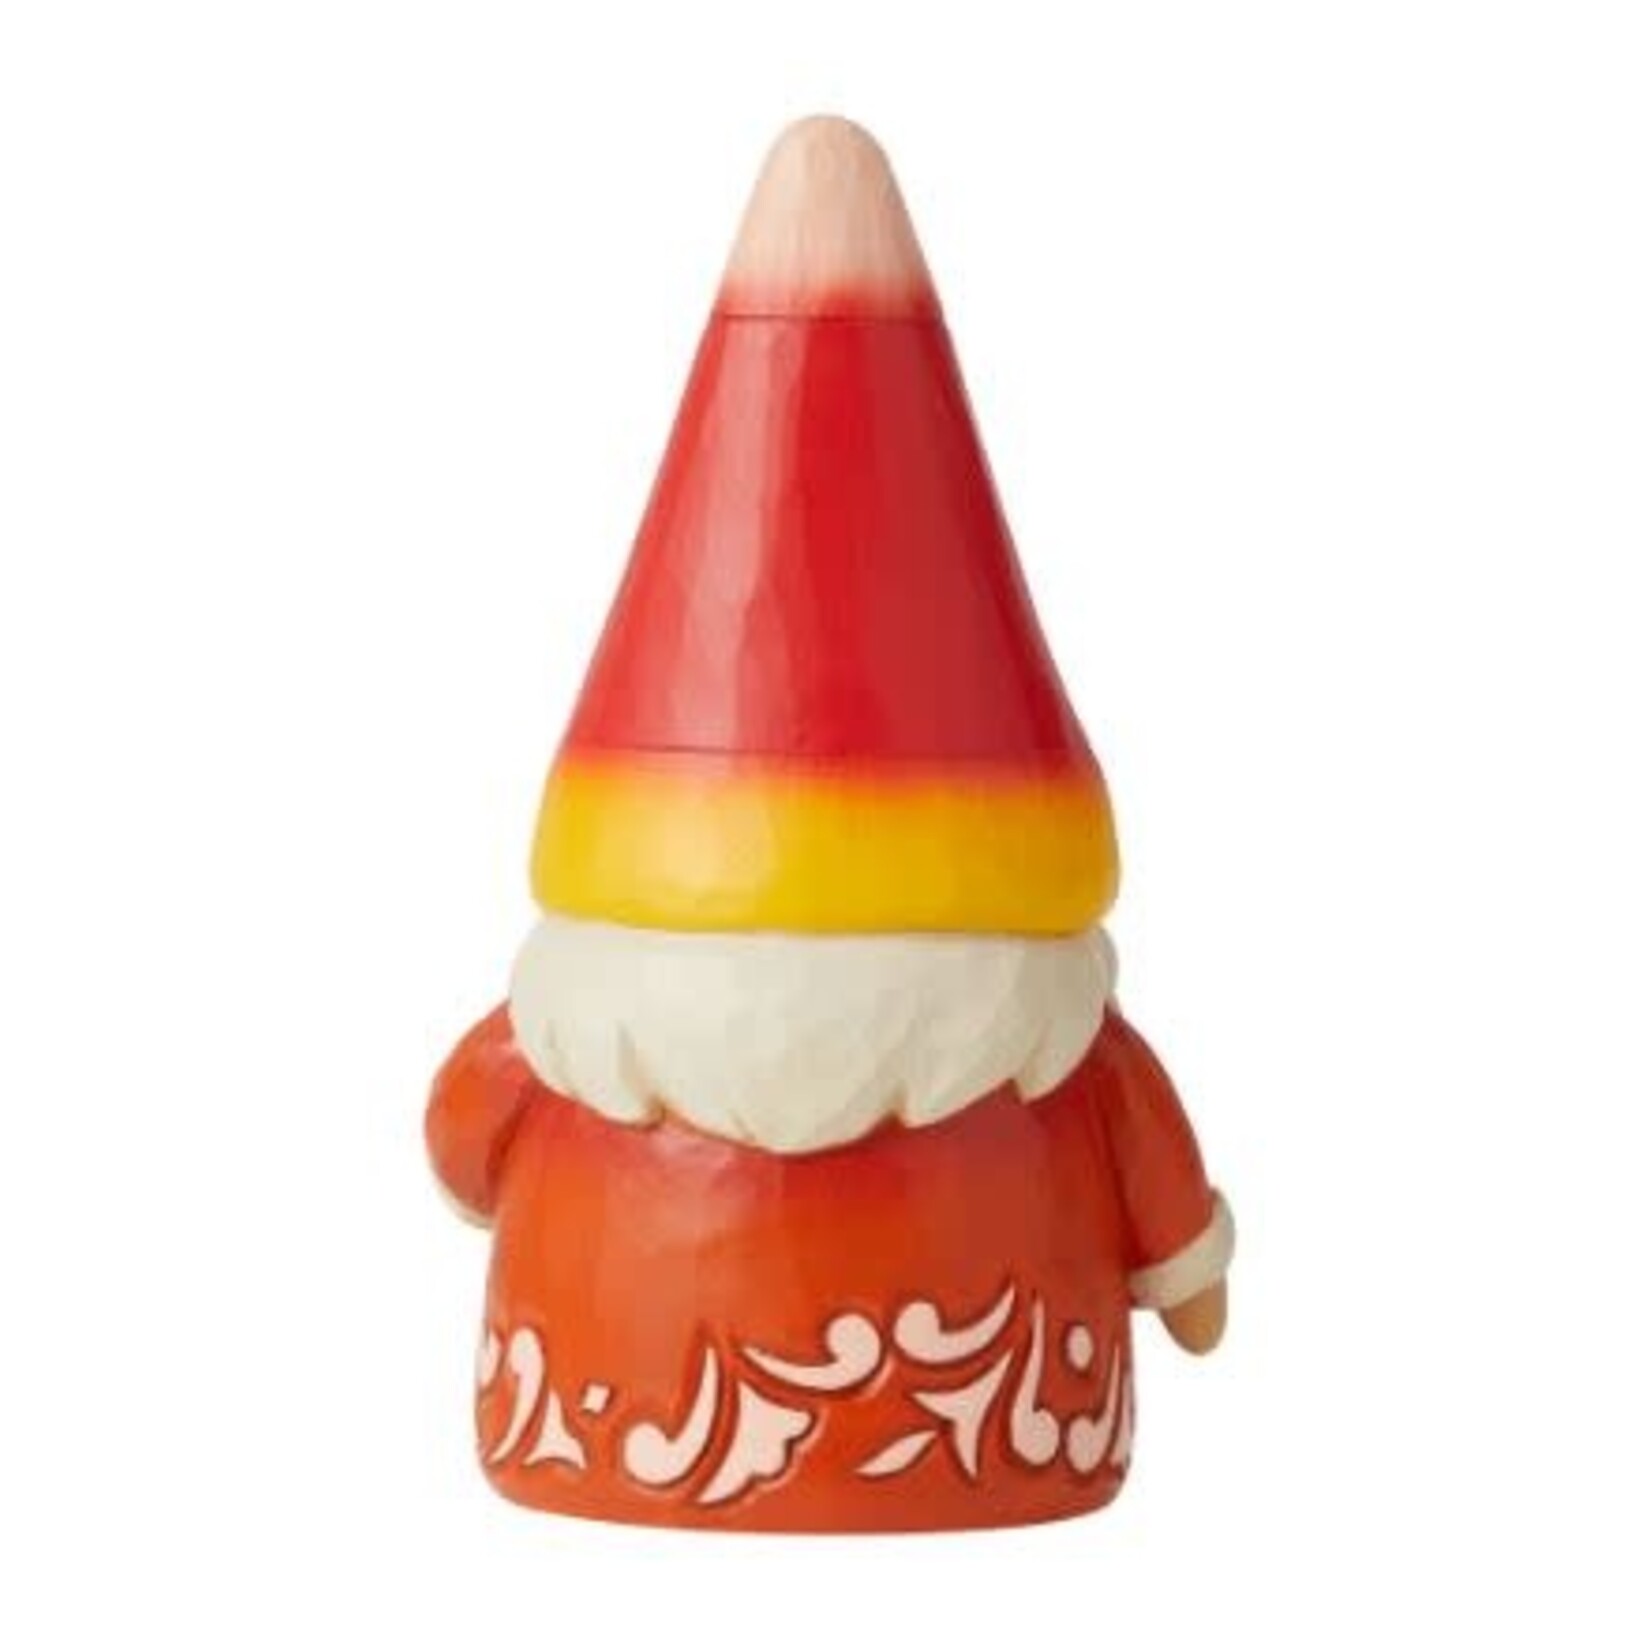 JS CANDY CORN GNOME FIG